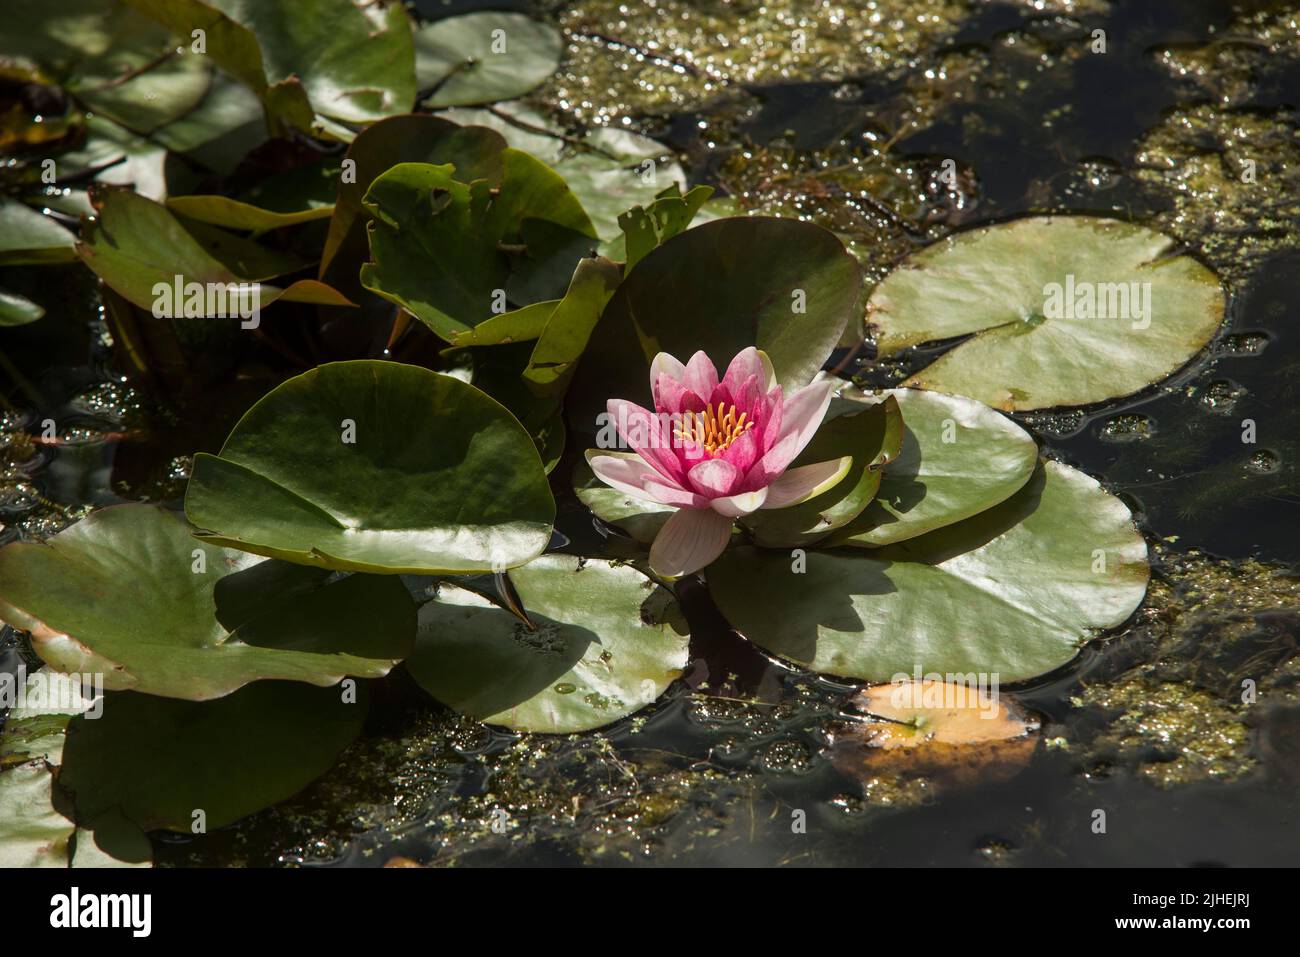 Red Waterlily - Nymphaea Attraction. Lotus flower. Flowers June - September. Stock Photo